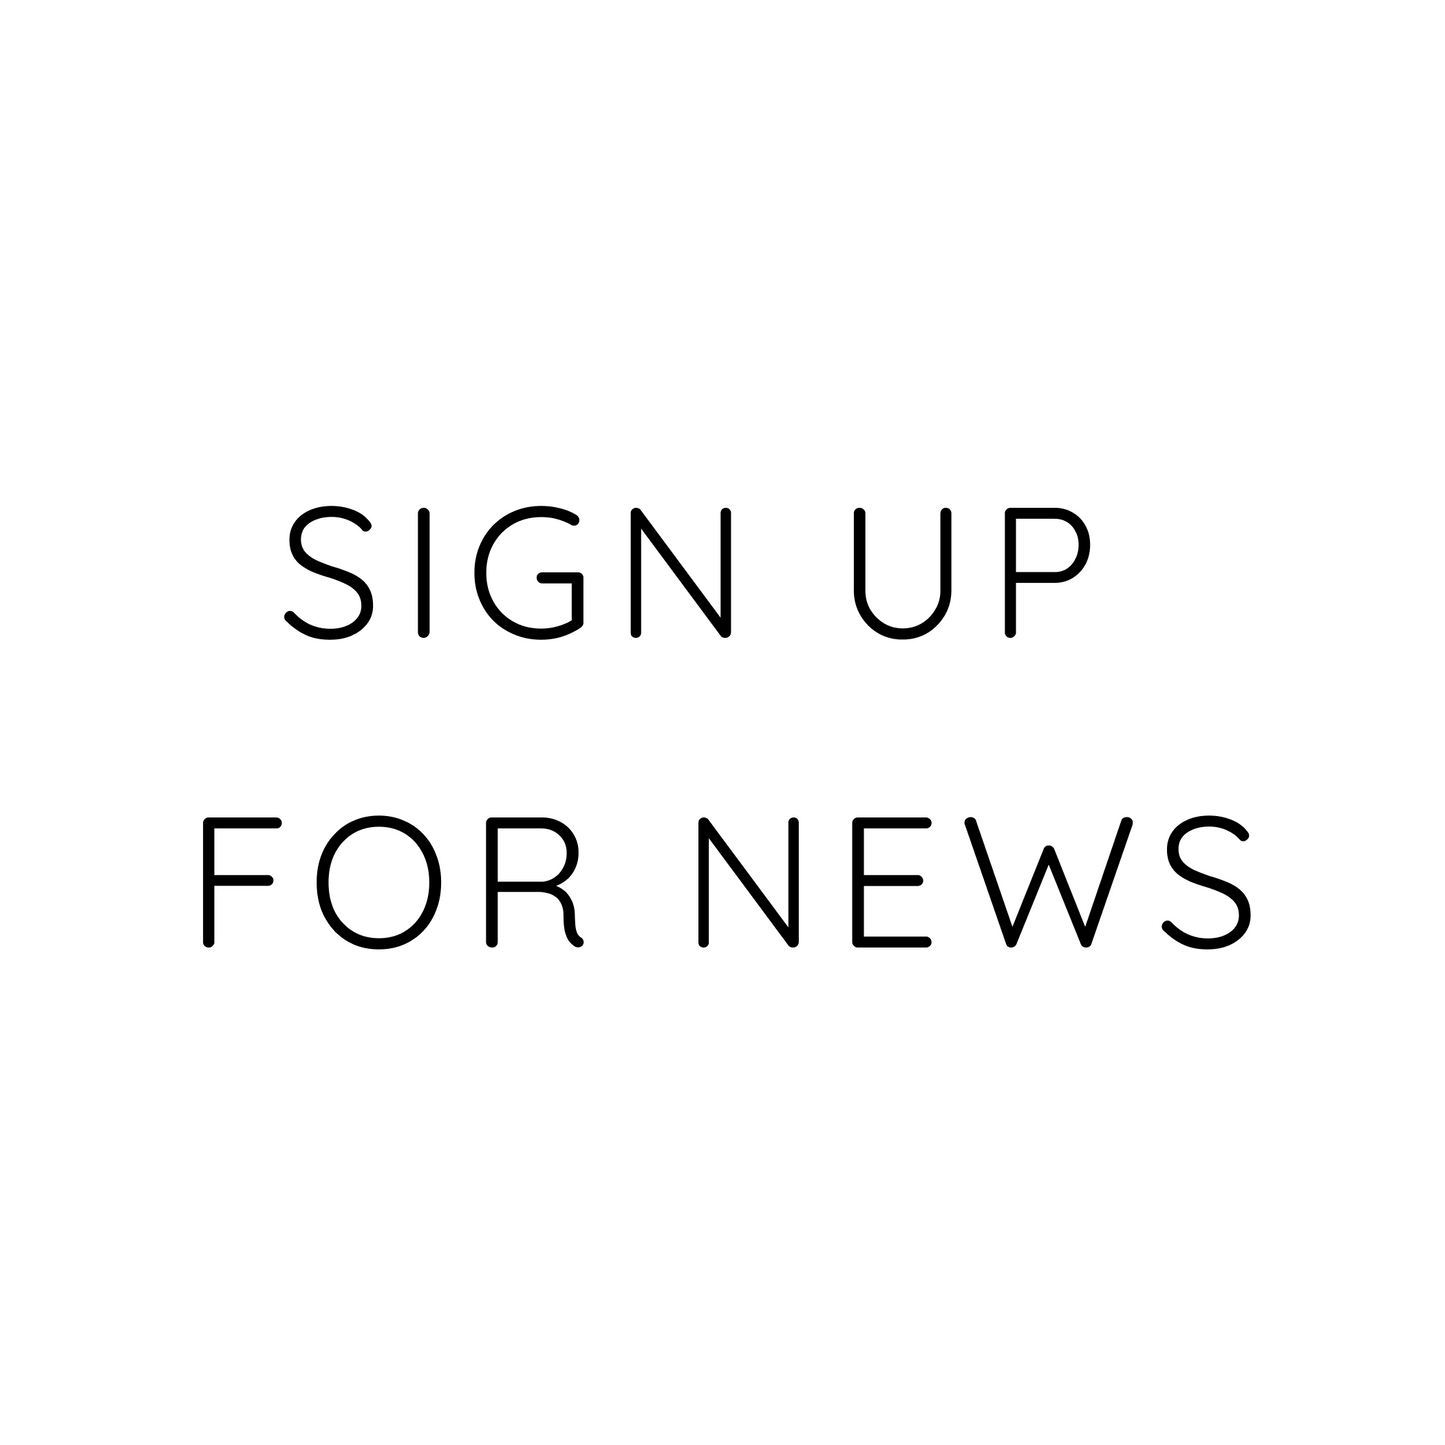 Sign up for news